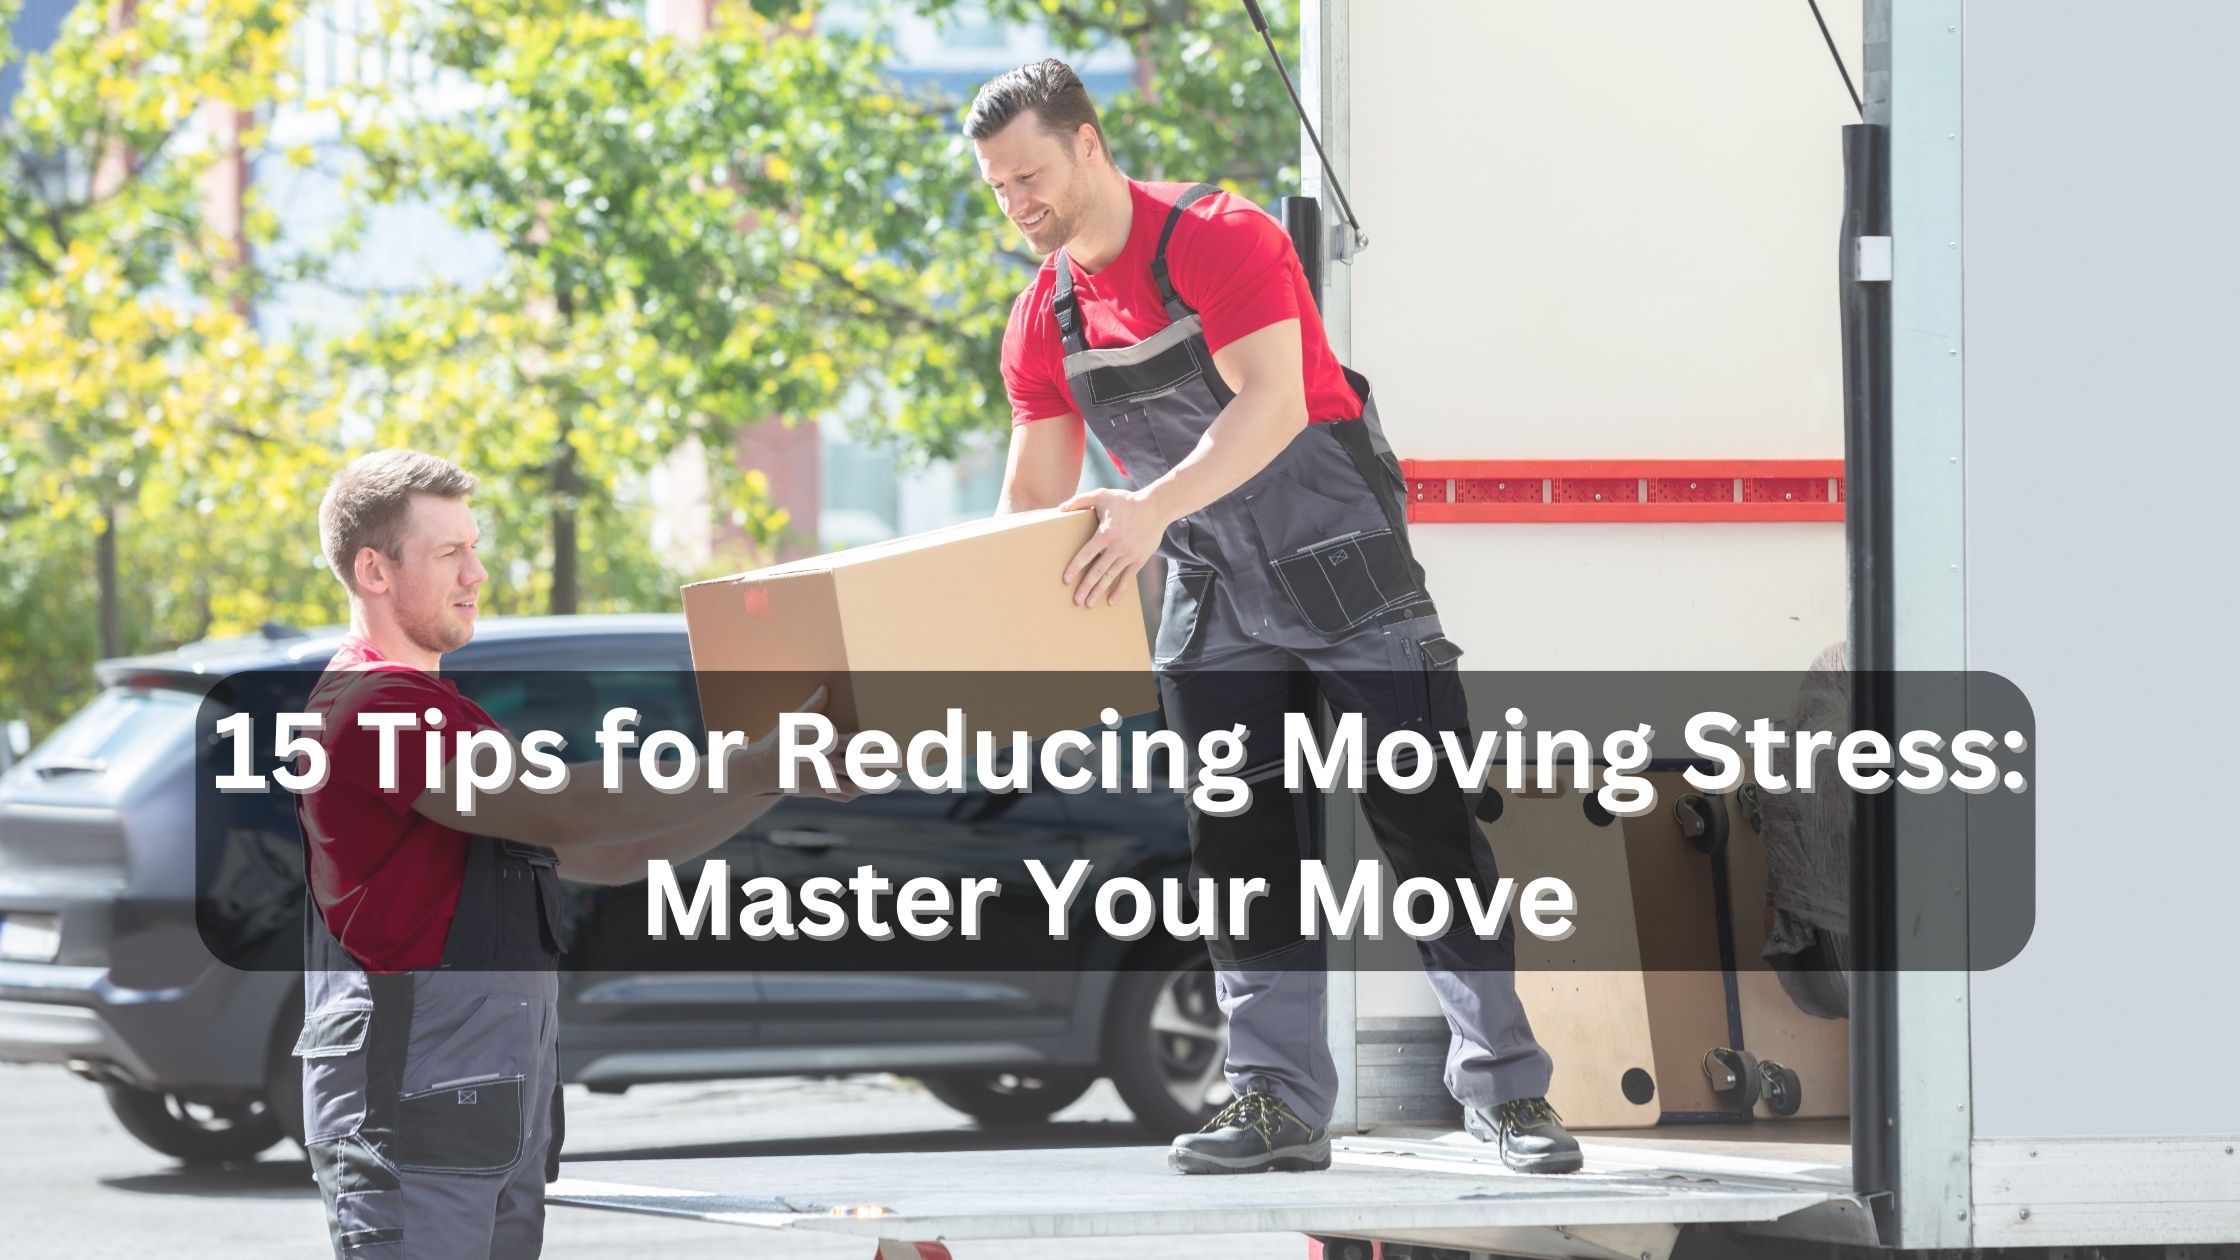 15 tips for reducing moving stress: master your move